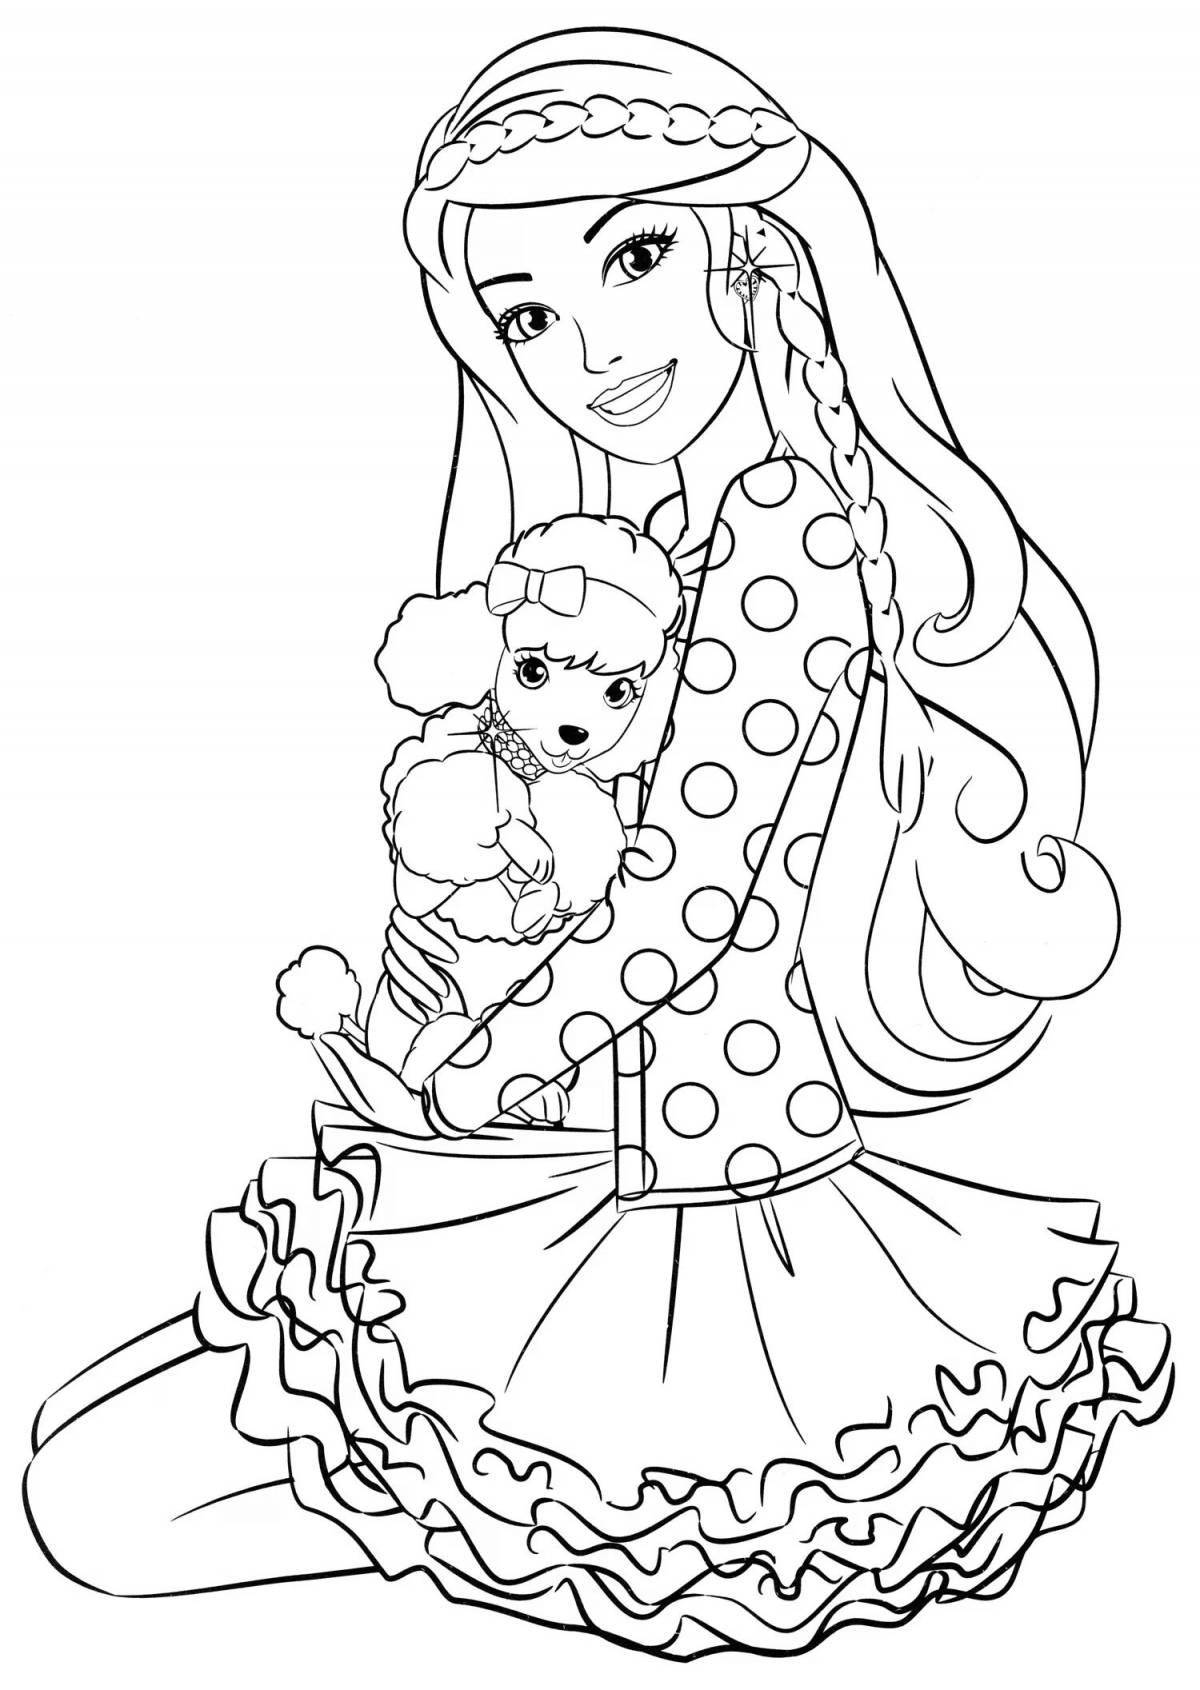 A fun coloring book for Barbie with a dog